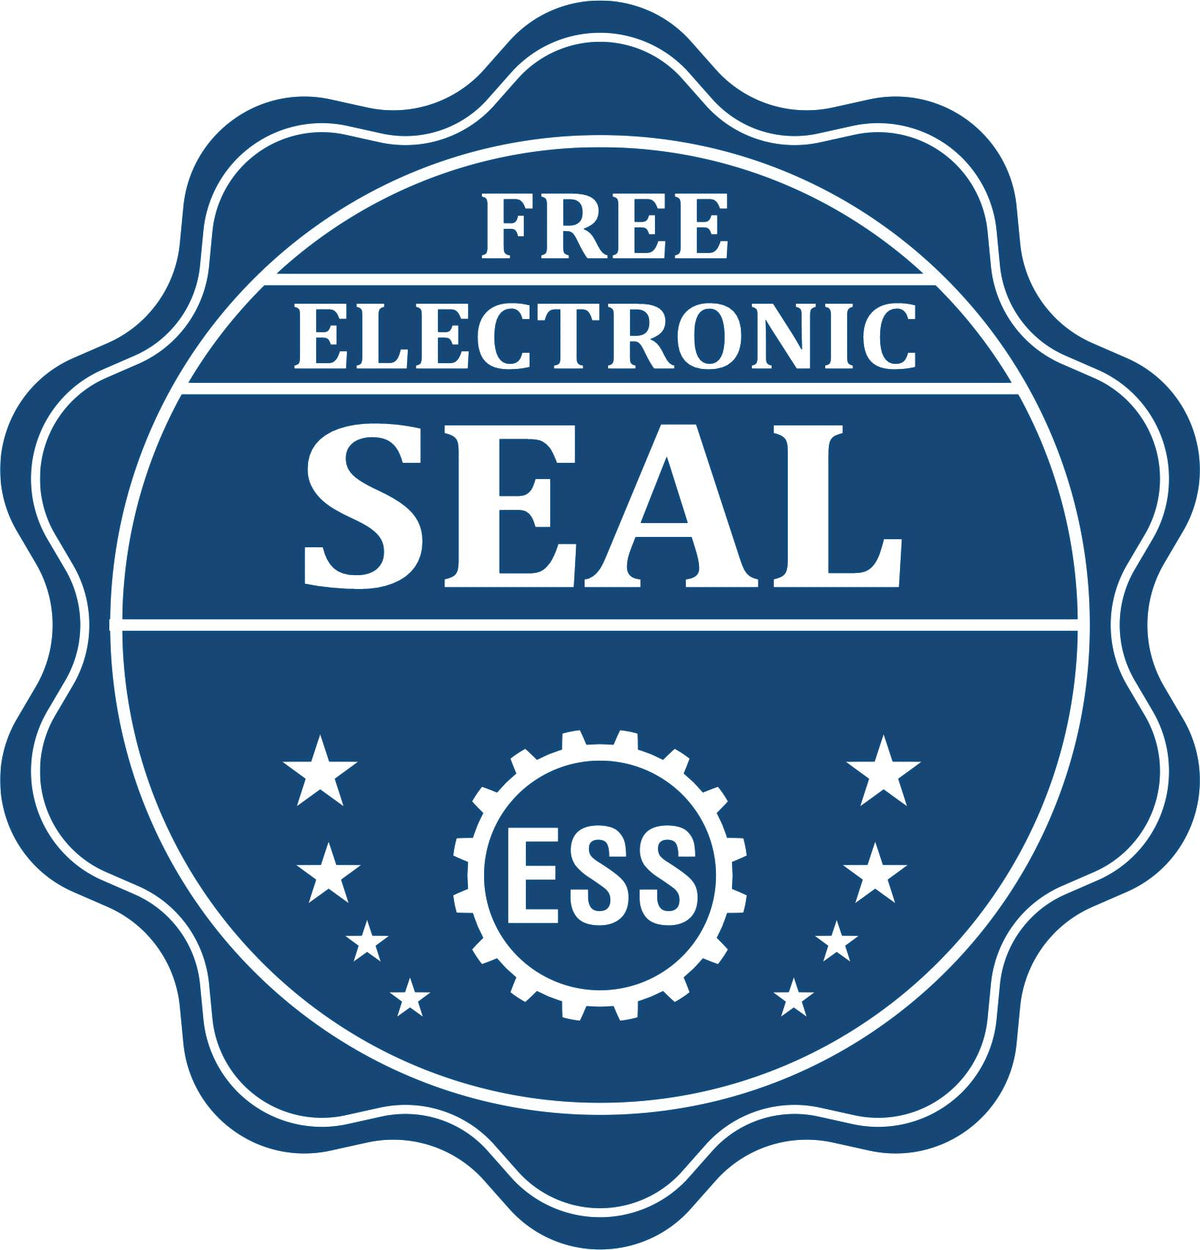 A badge showing a free electronic seal for the Handheld Guam Architect Seal Embosser with stars and the ESS gear on the emblem.